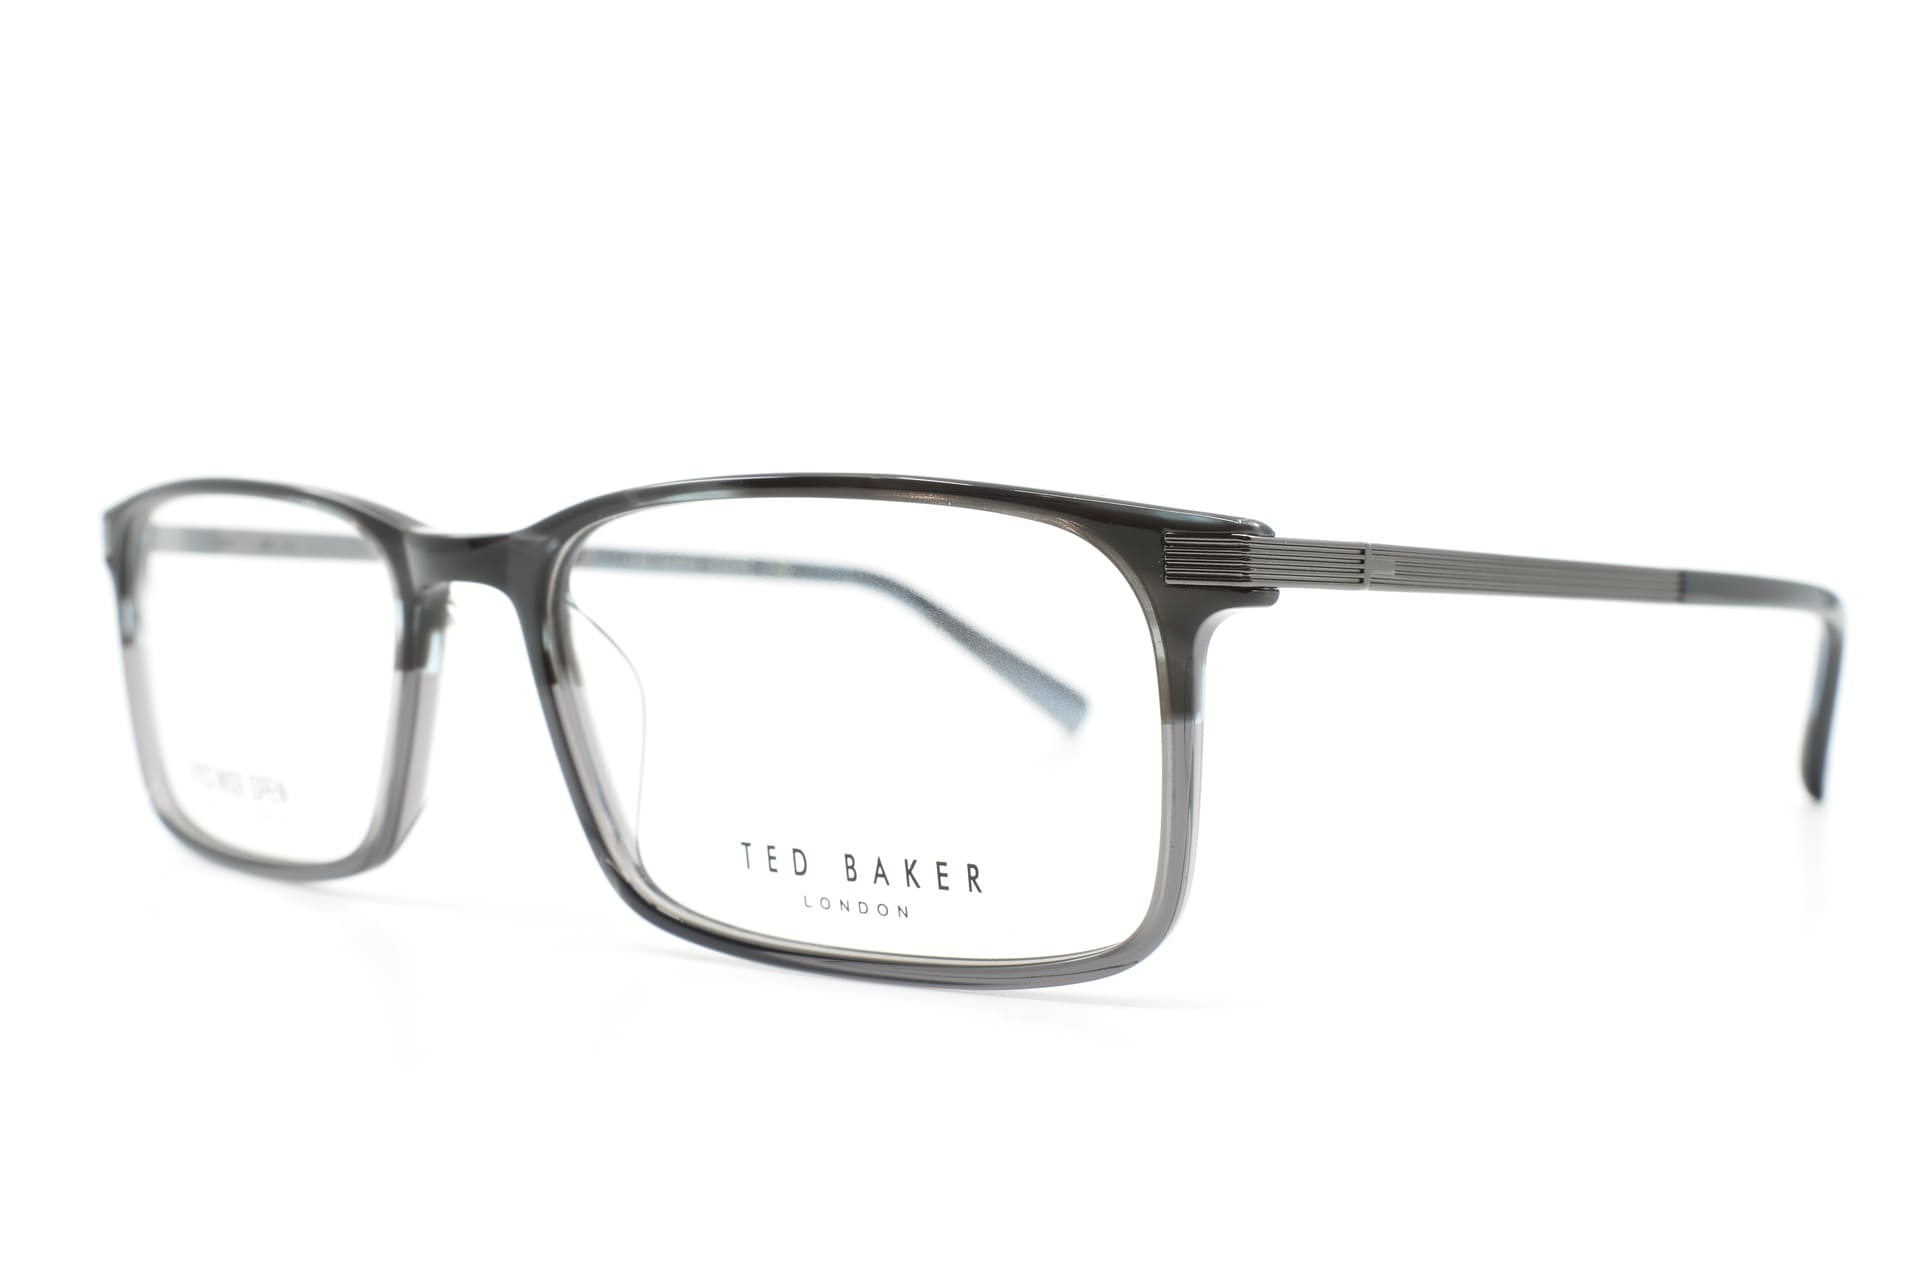 Ted baker - Gry / 57-18-145